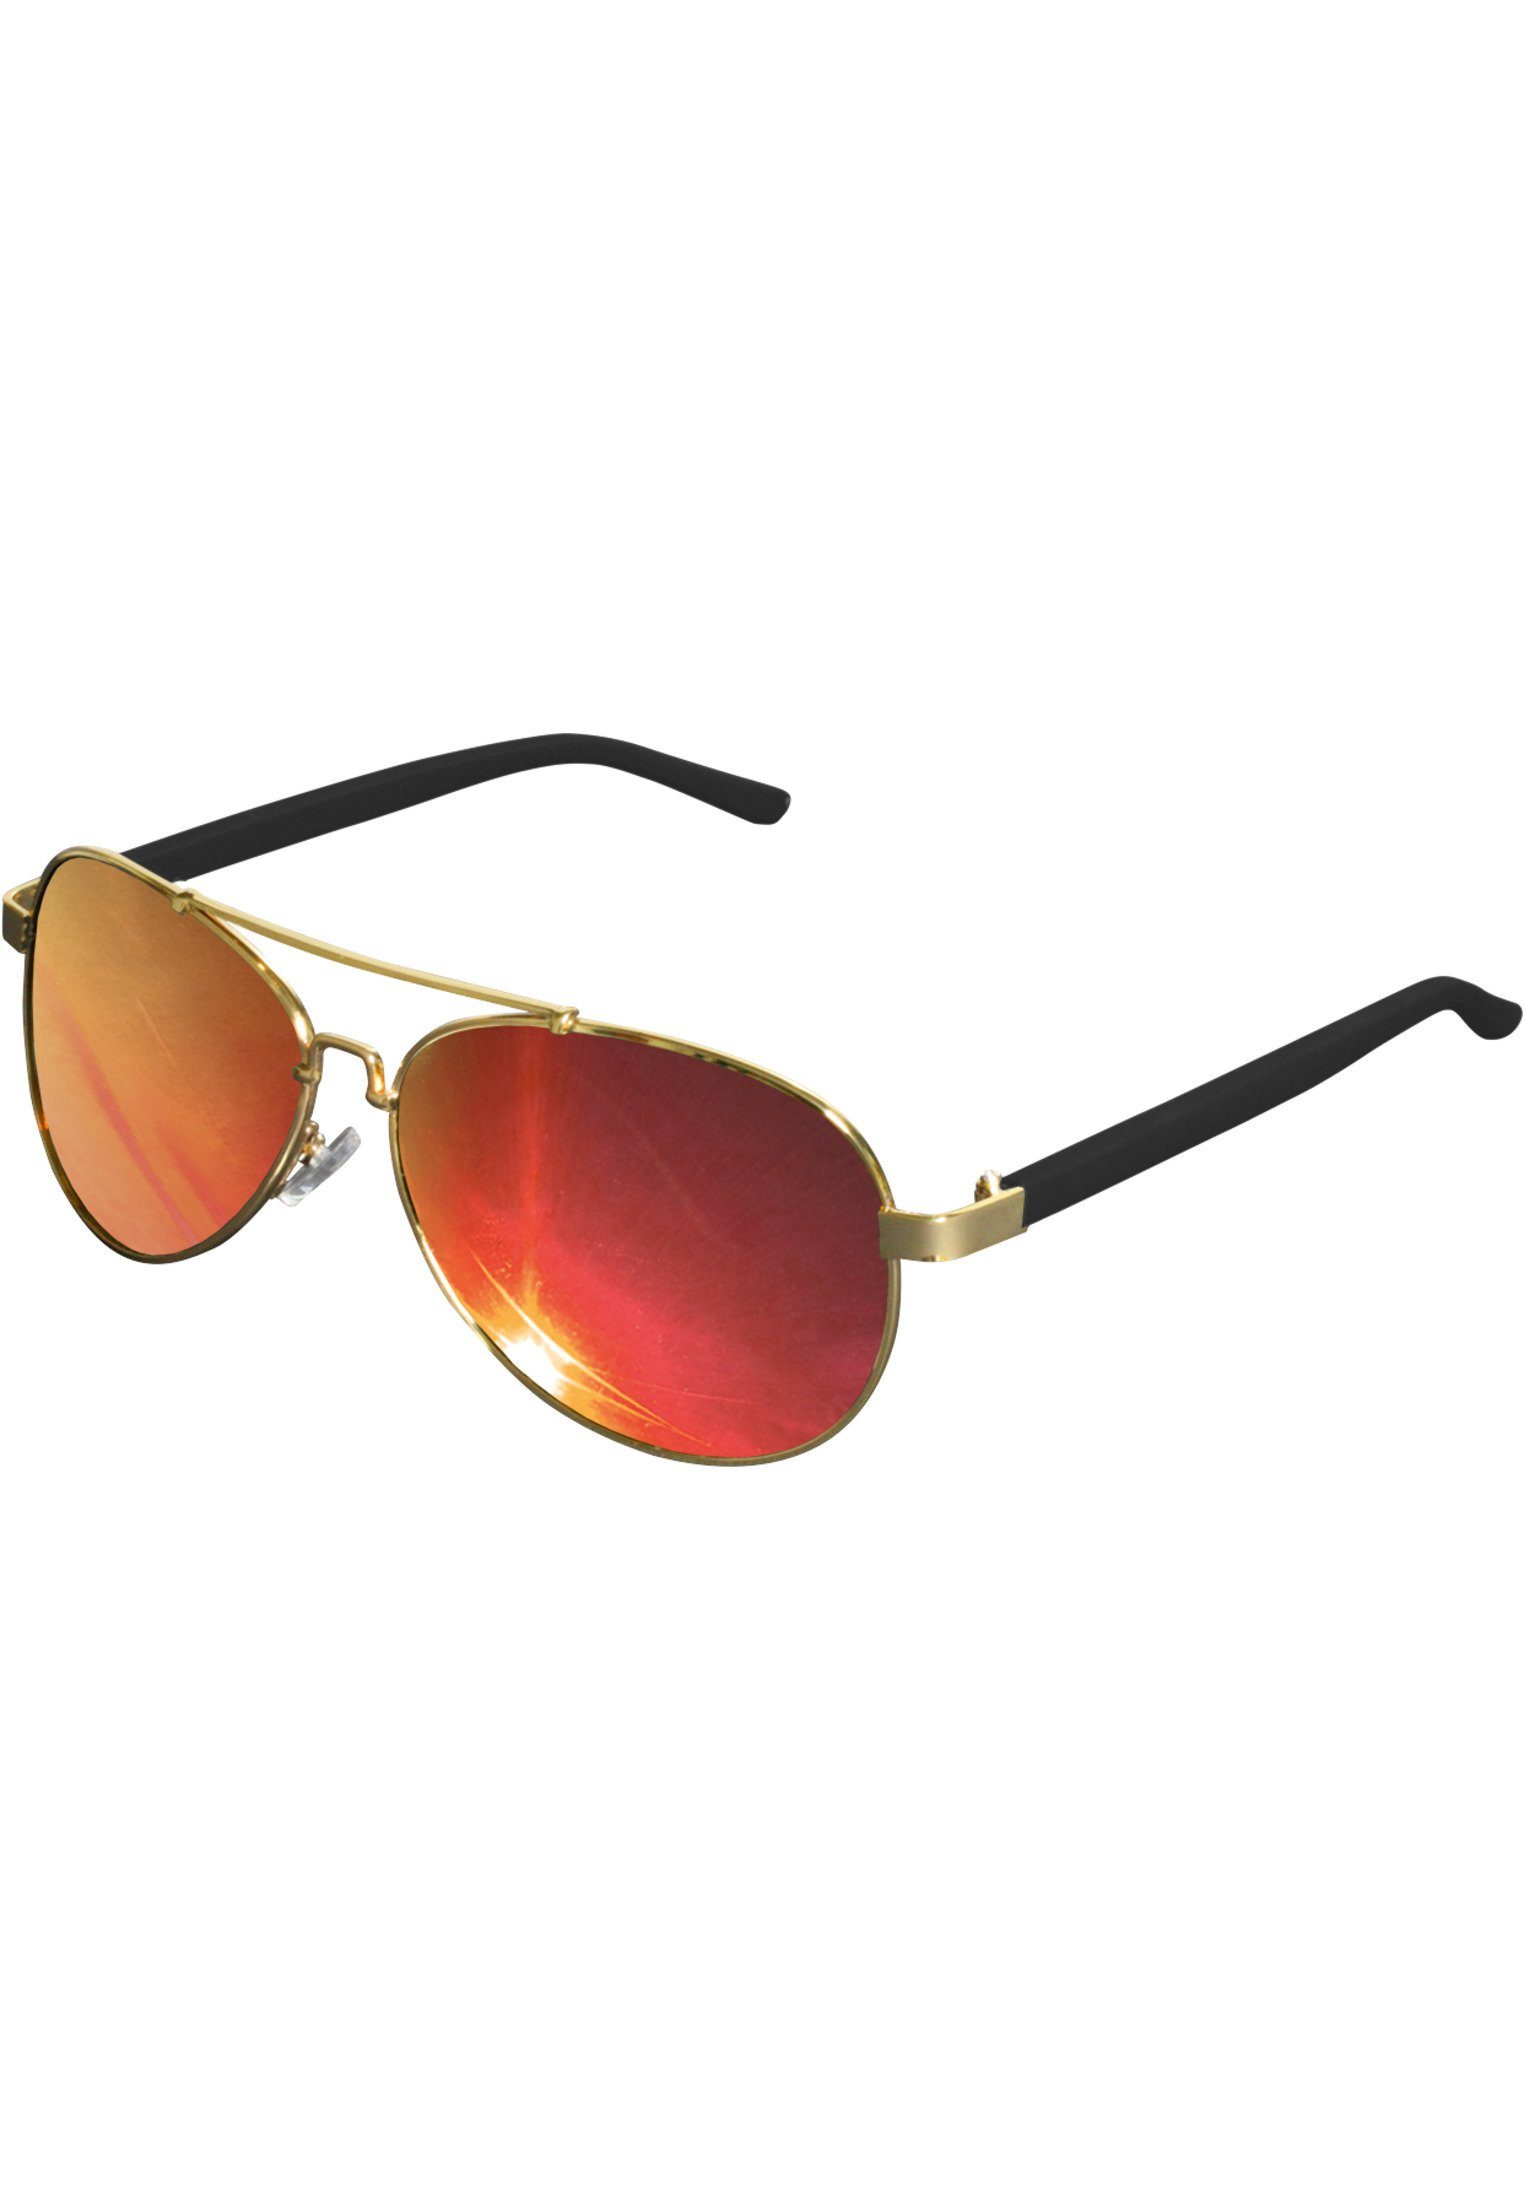 MSTRDS Sonnenbrille Mumbo Accessoires Mirror gold/red Sunglasses